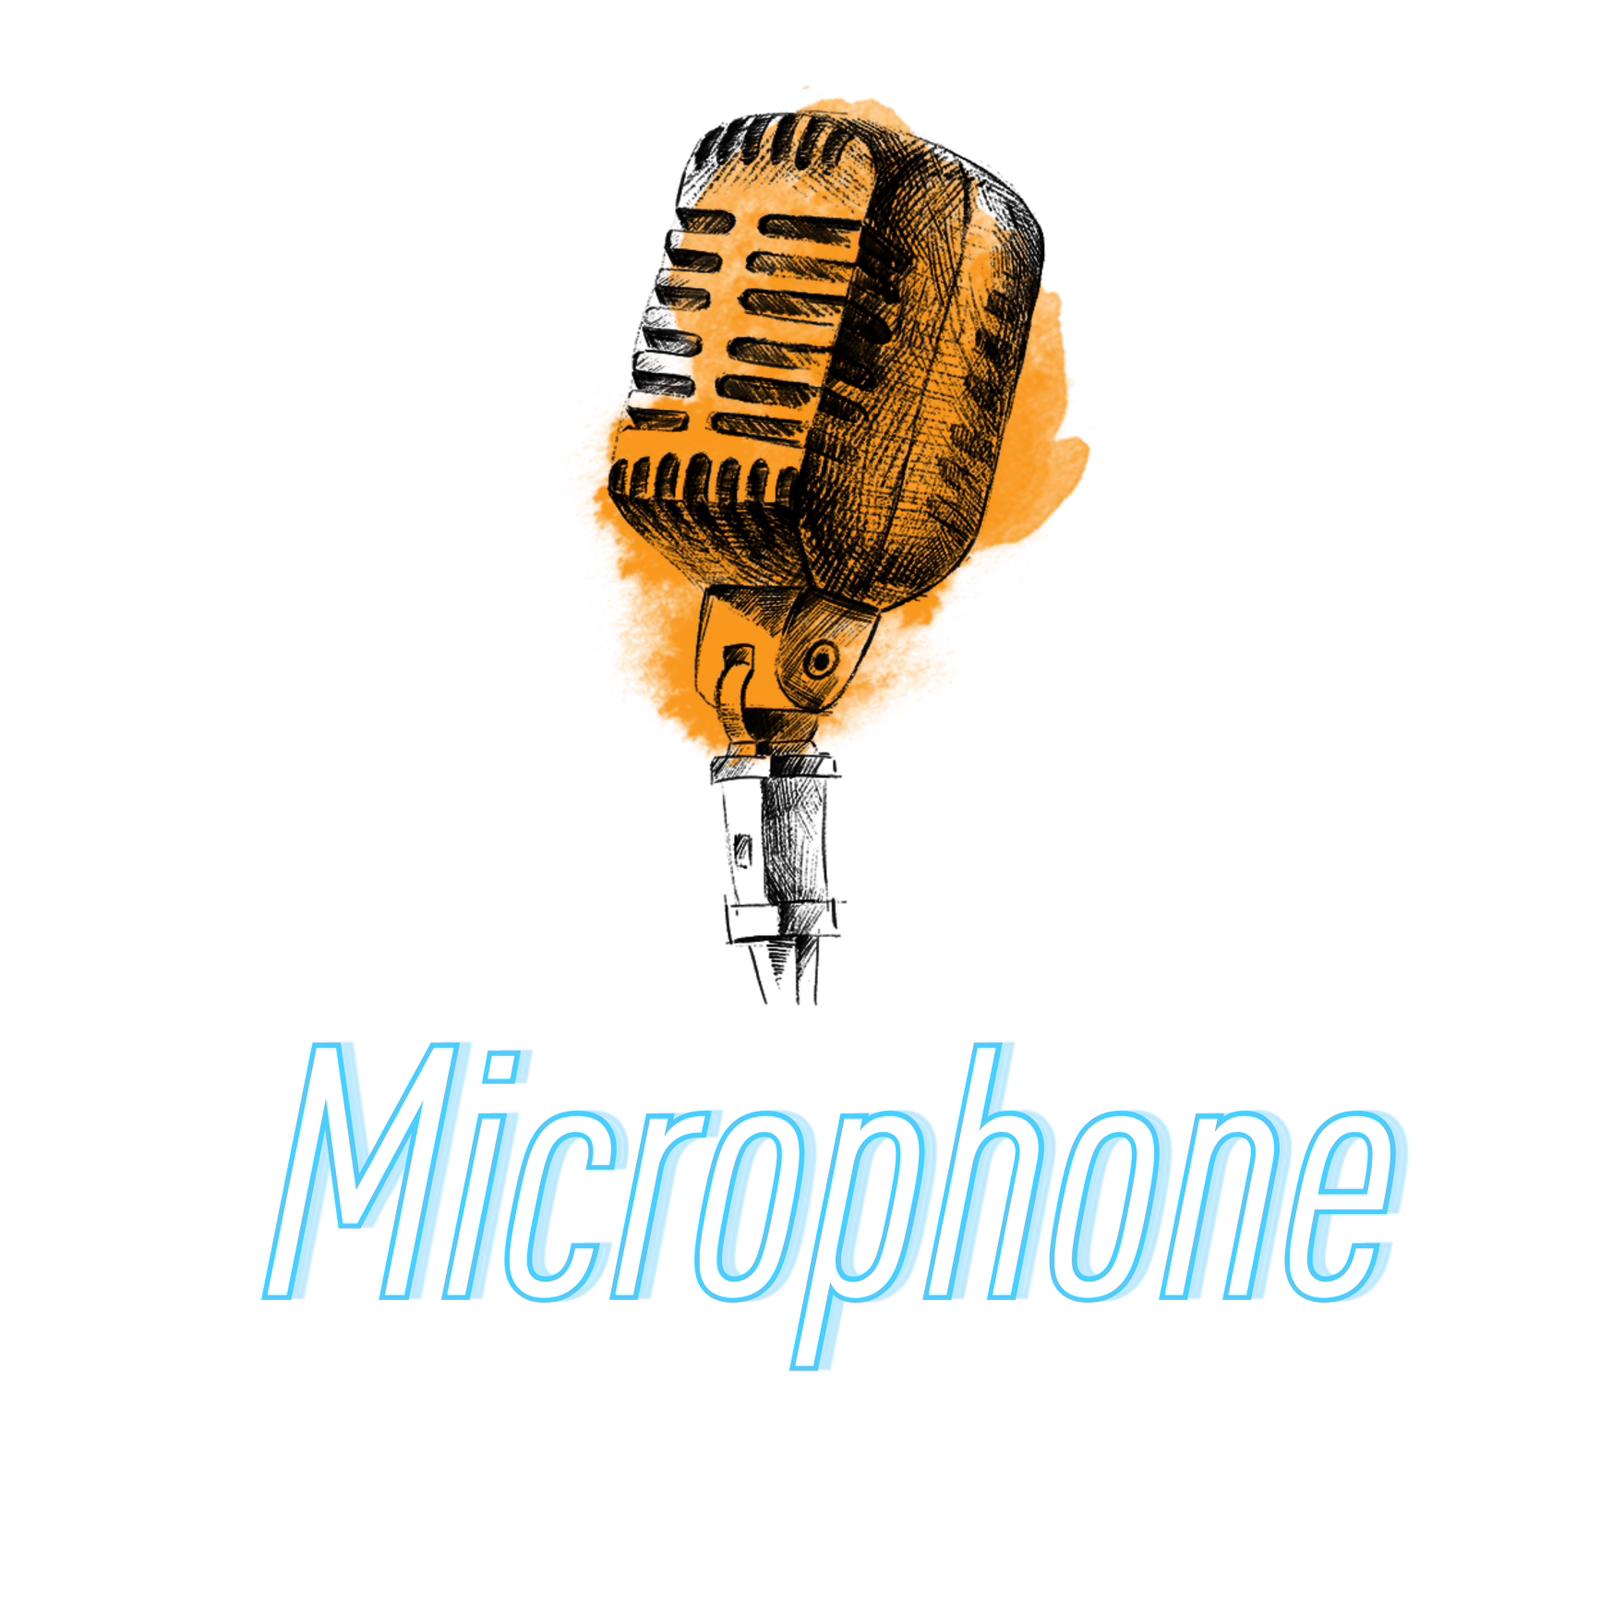 Microphone-Crystal Clear Audio For Engaging Content